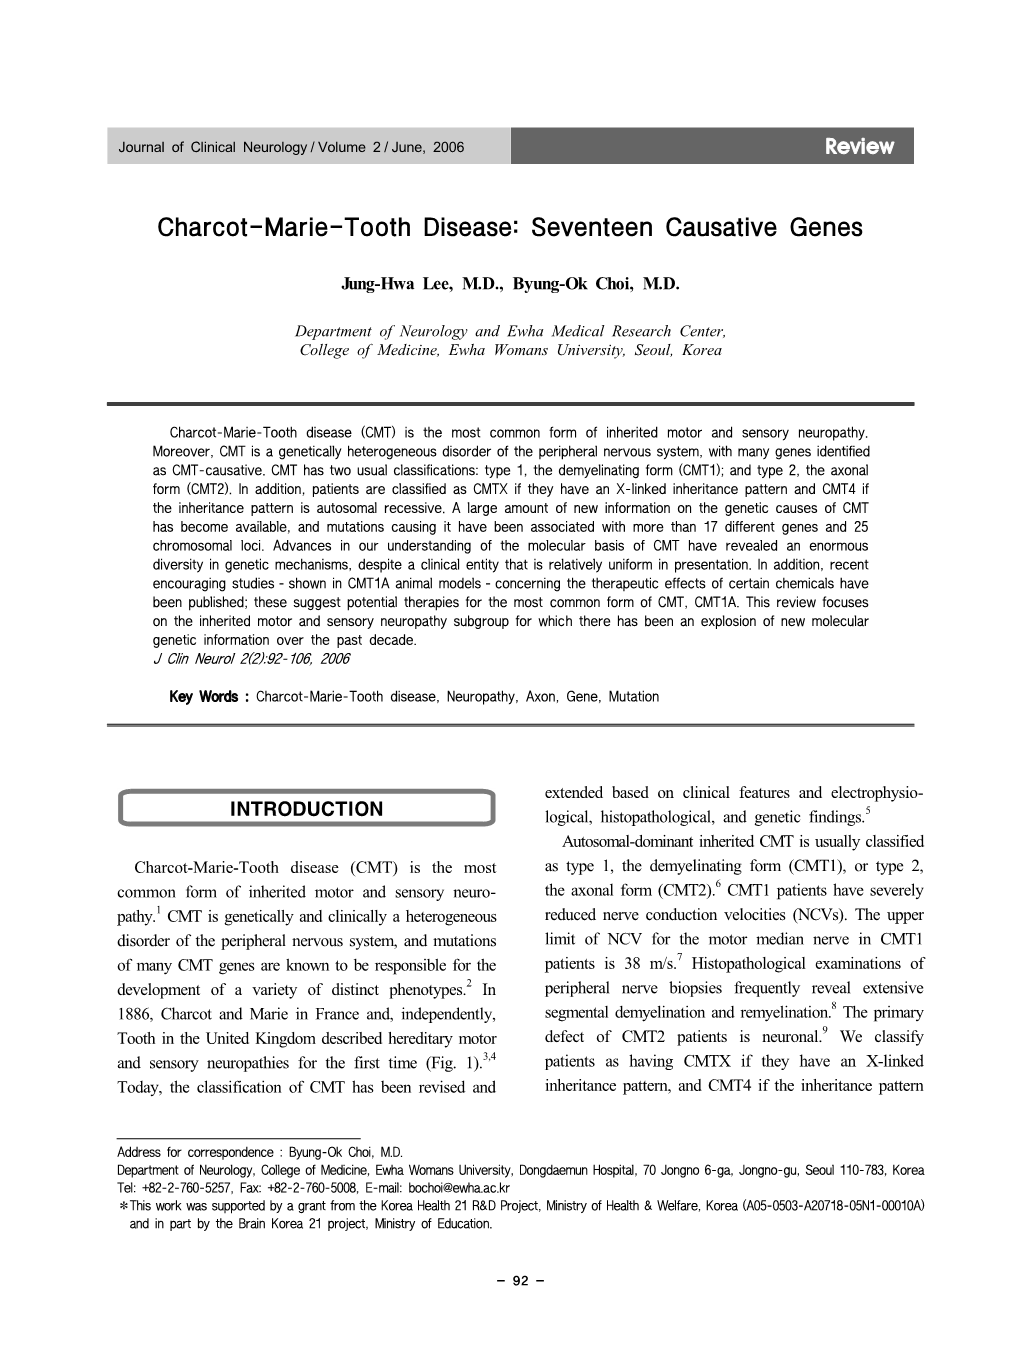 Charcot-Marie-Tooth Disease: Seventeen Causative Genes